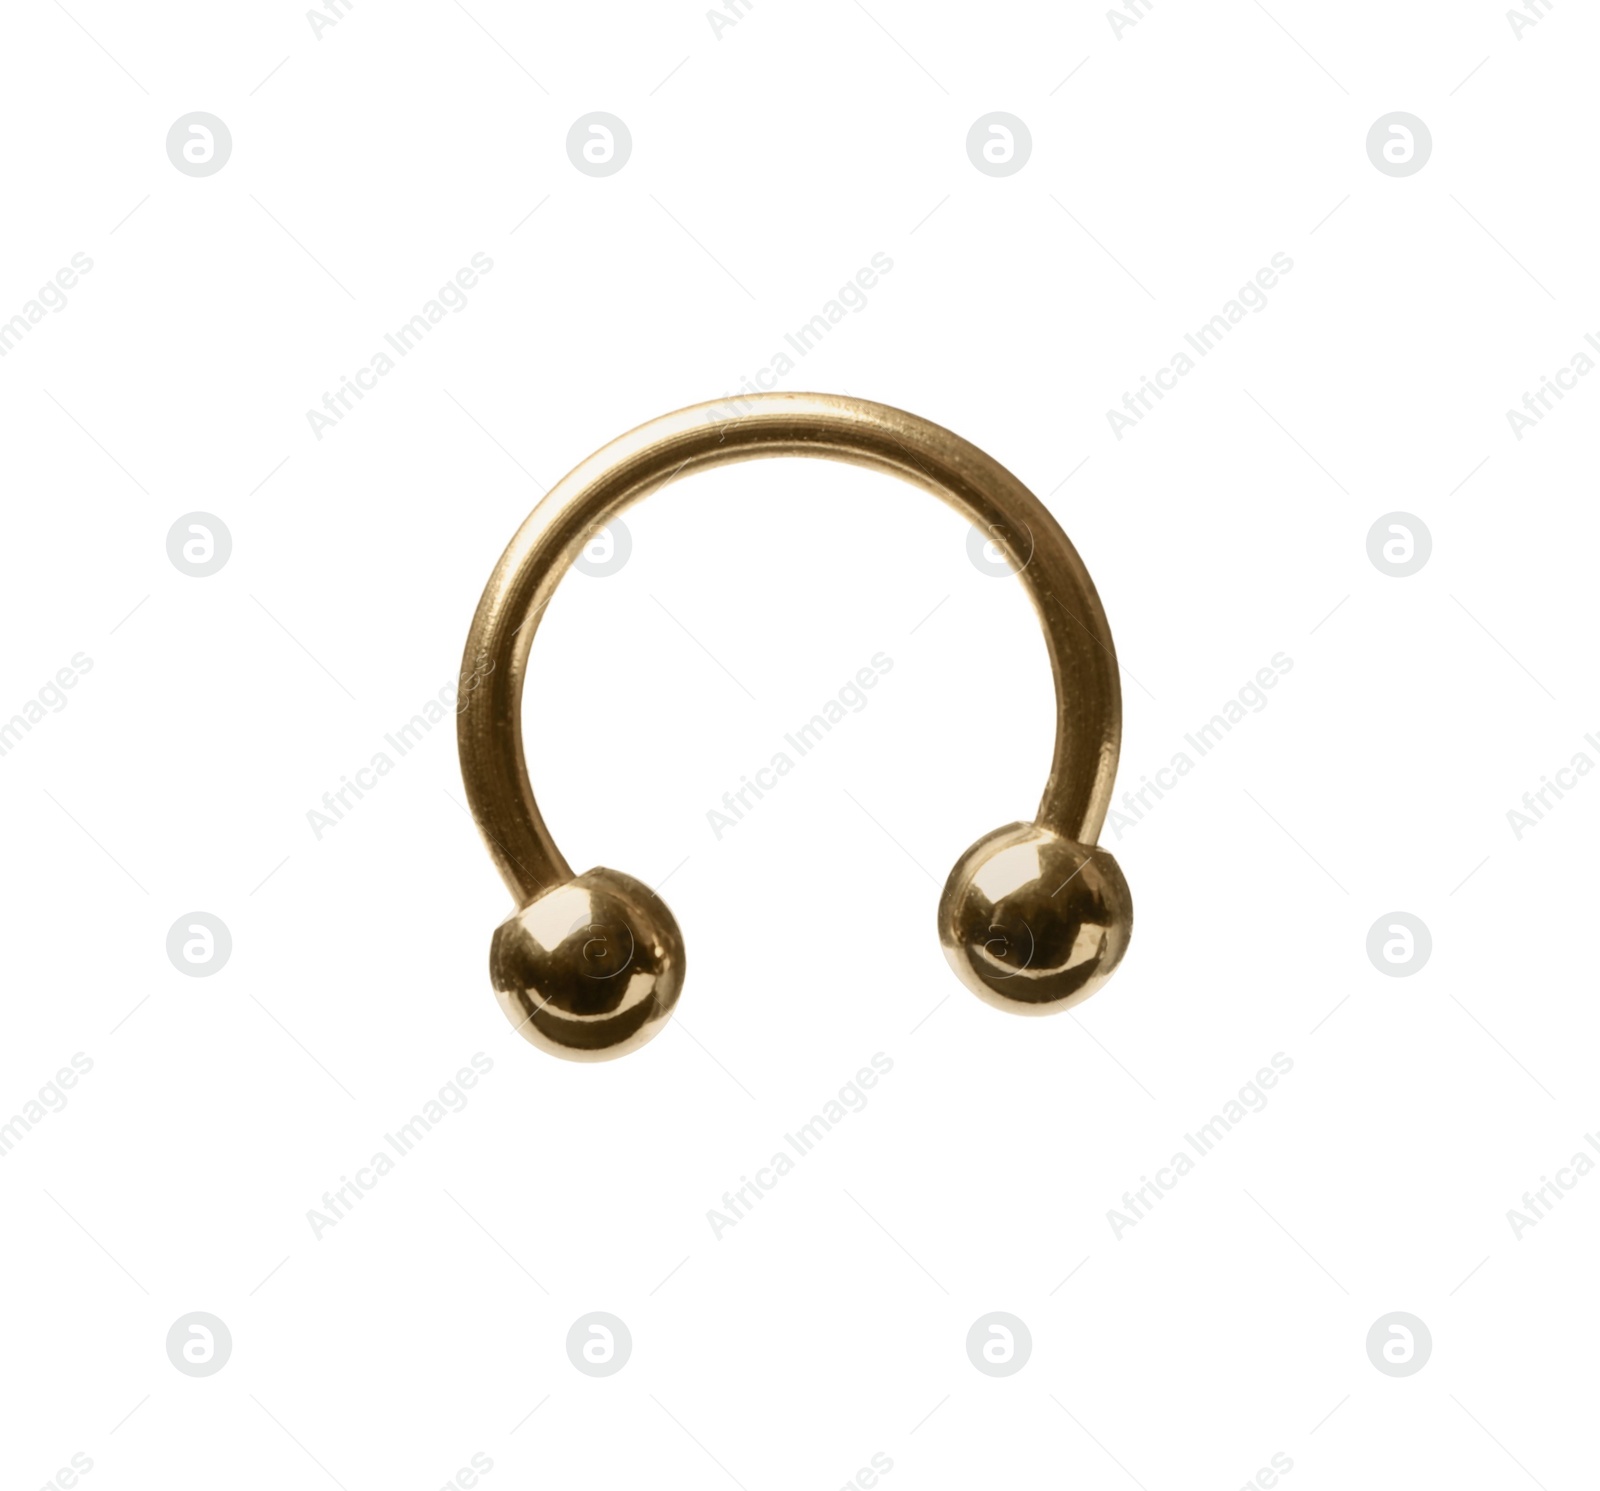 Photo of Piercing jewelry. Circular barbell isolated on white